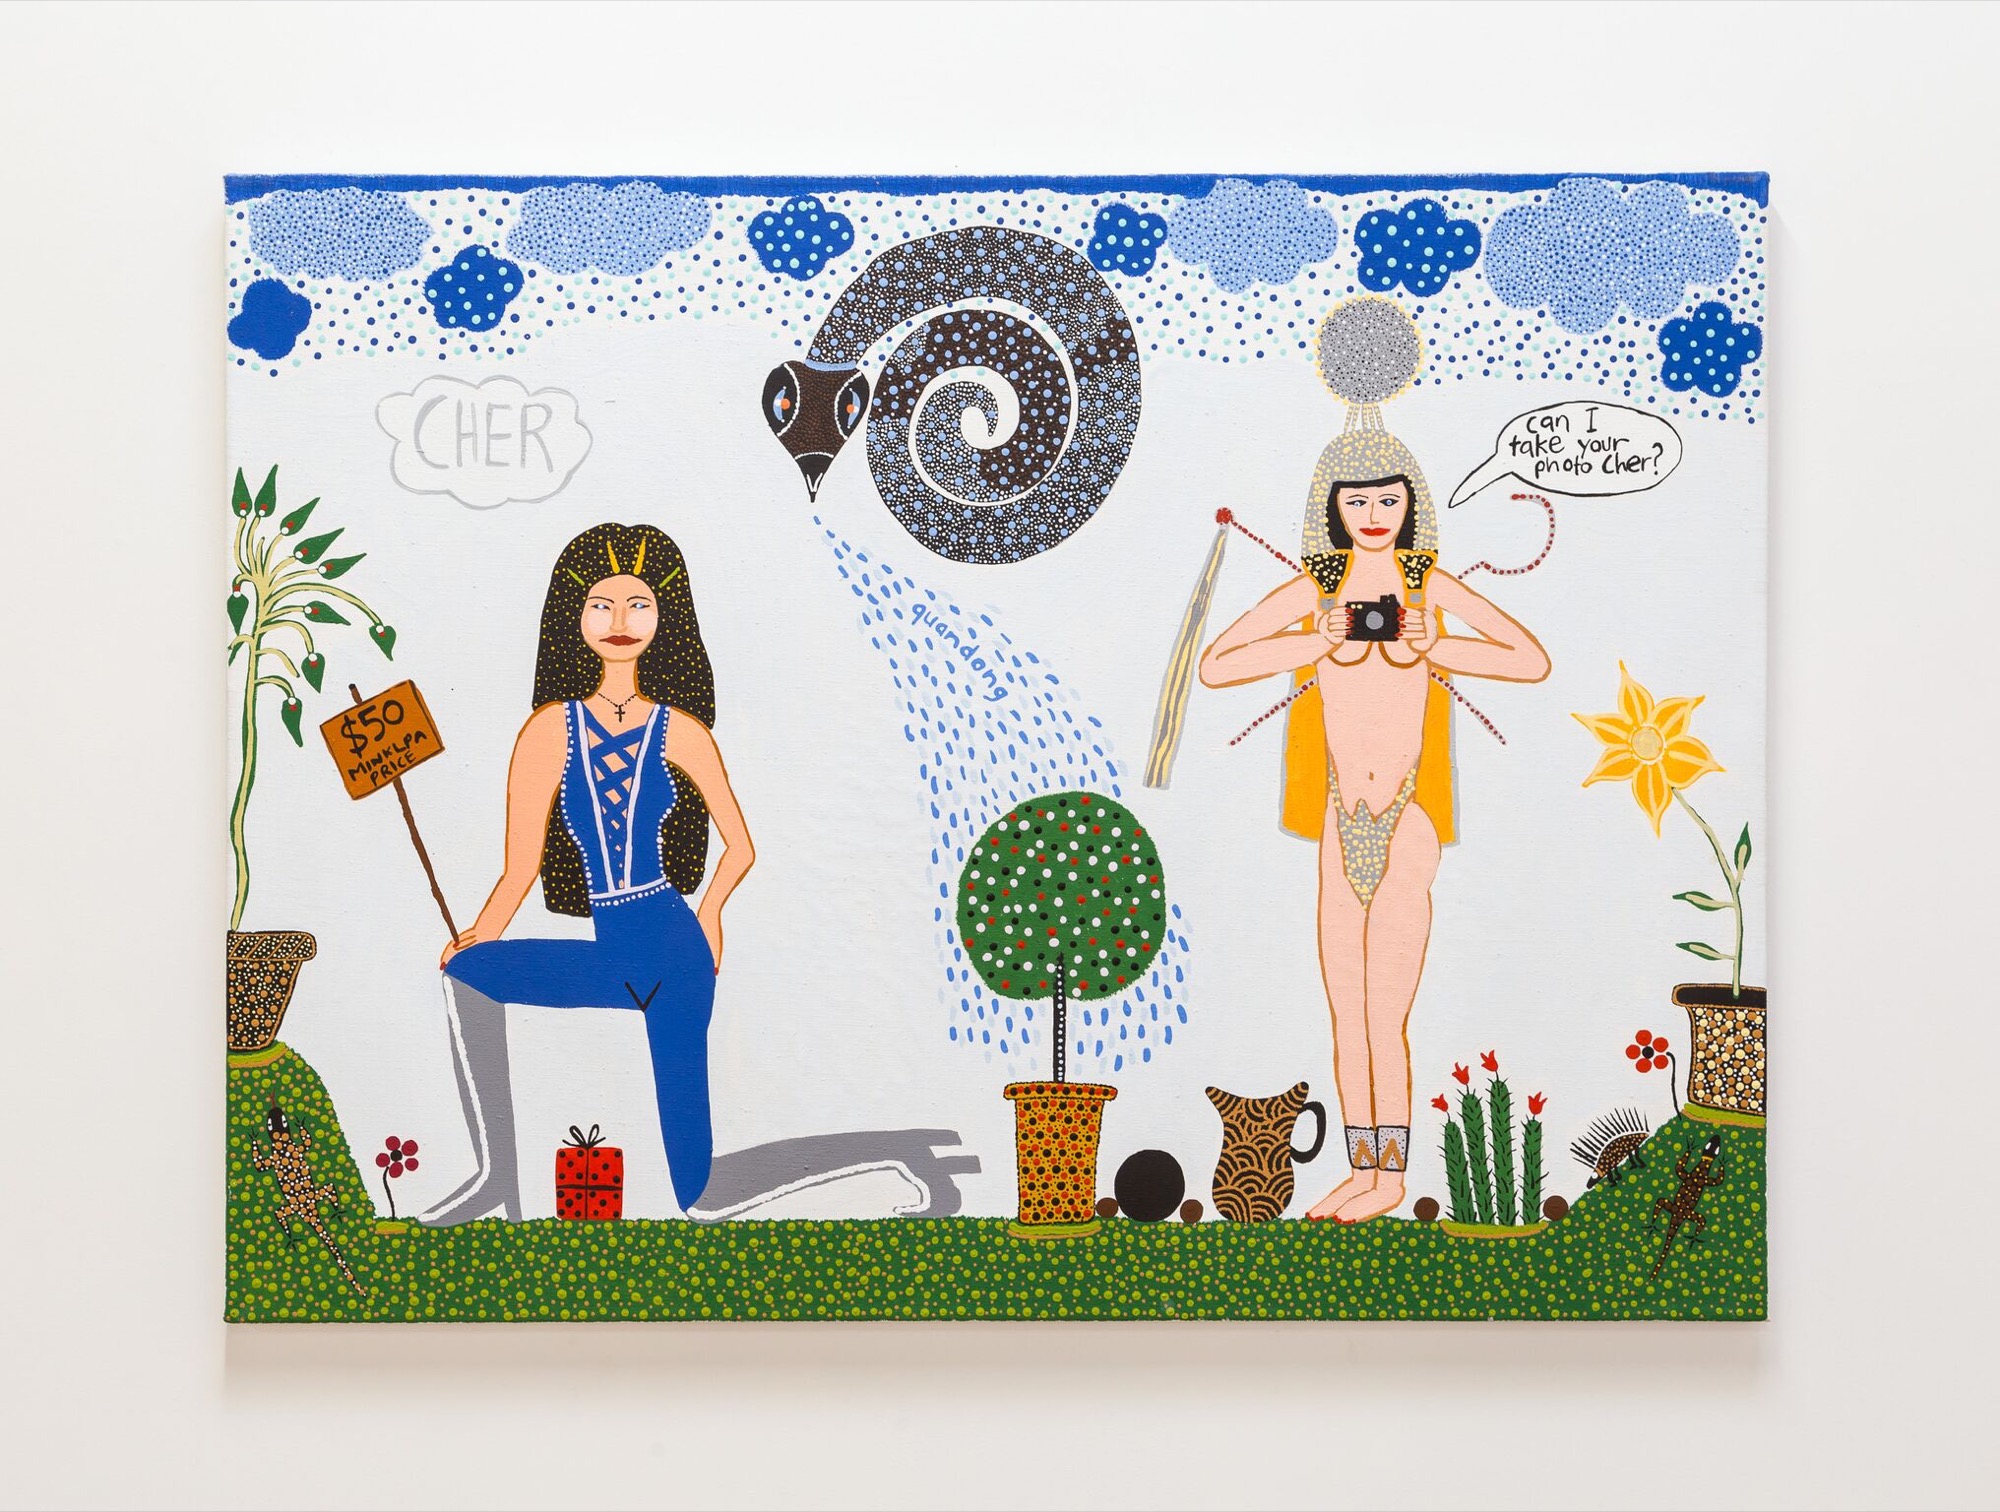 Kaylene Whiskey, <em>Cher and the Water Snake</em>, 2017, acrylic on linen. Courtesy of Sims Dickson Collection, NSW. Photo: André Piguet.